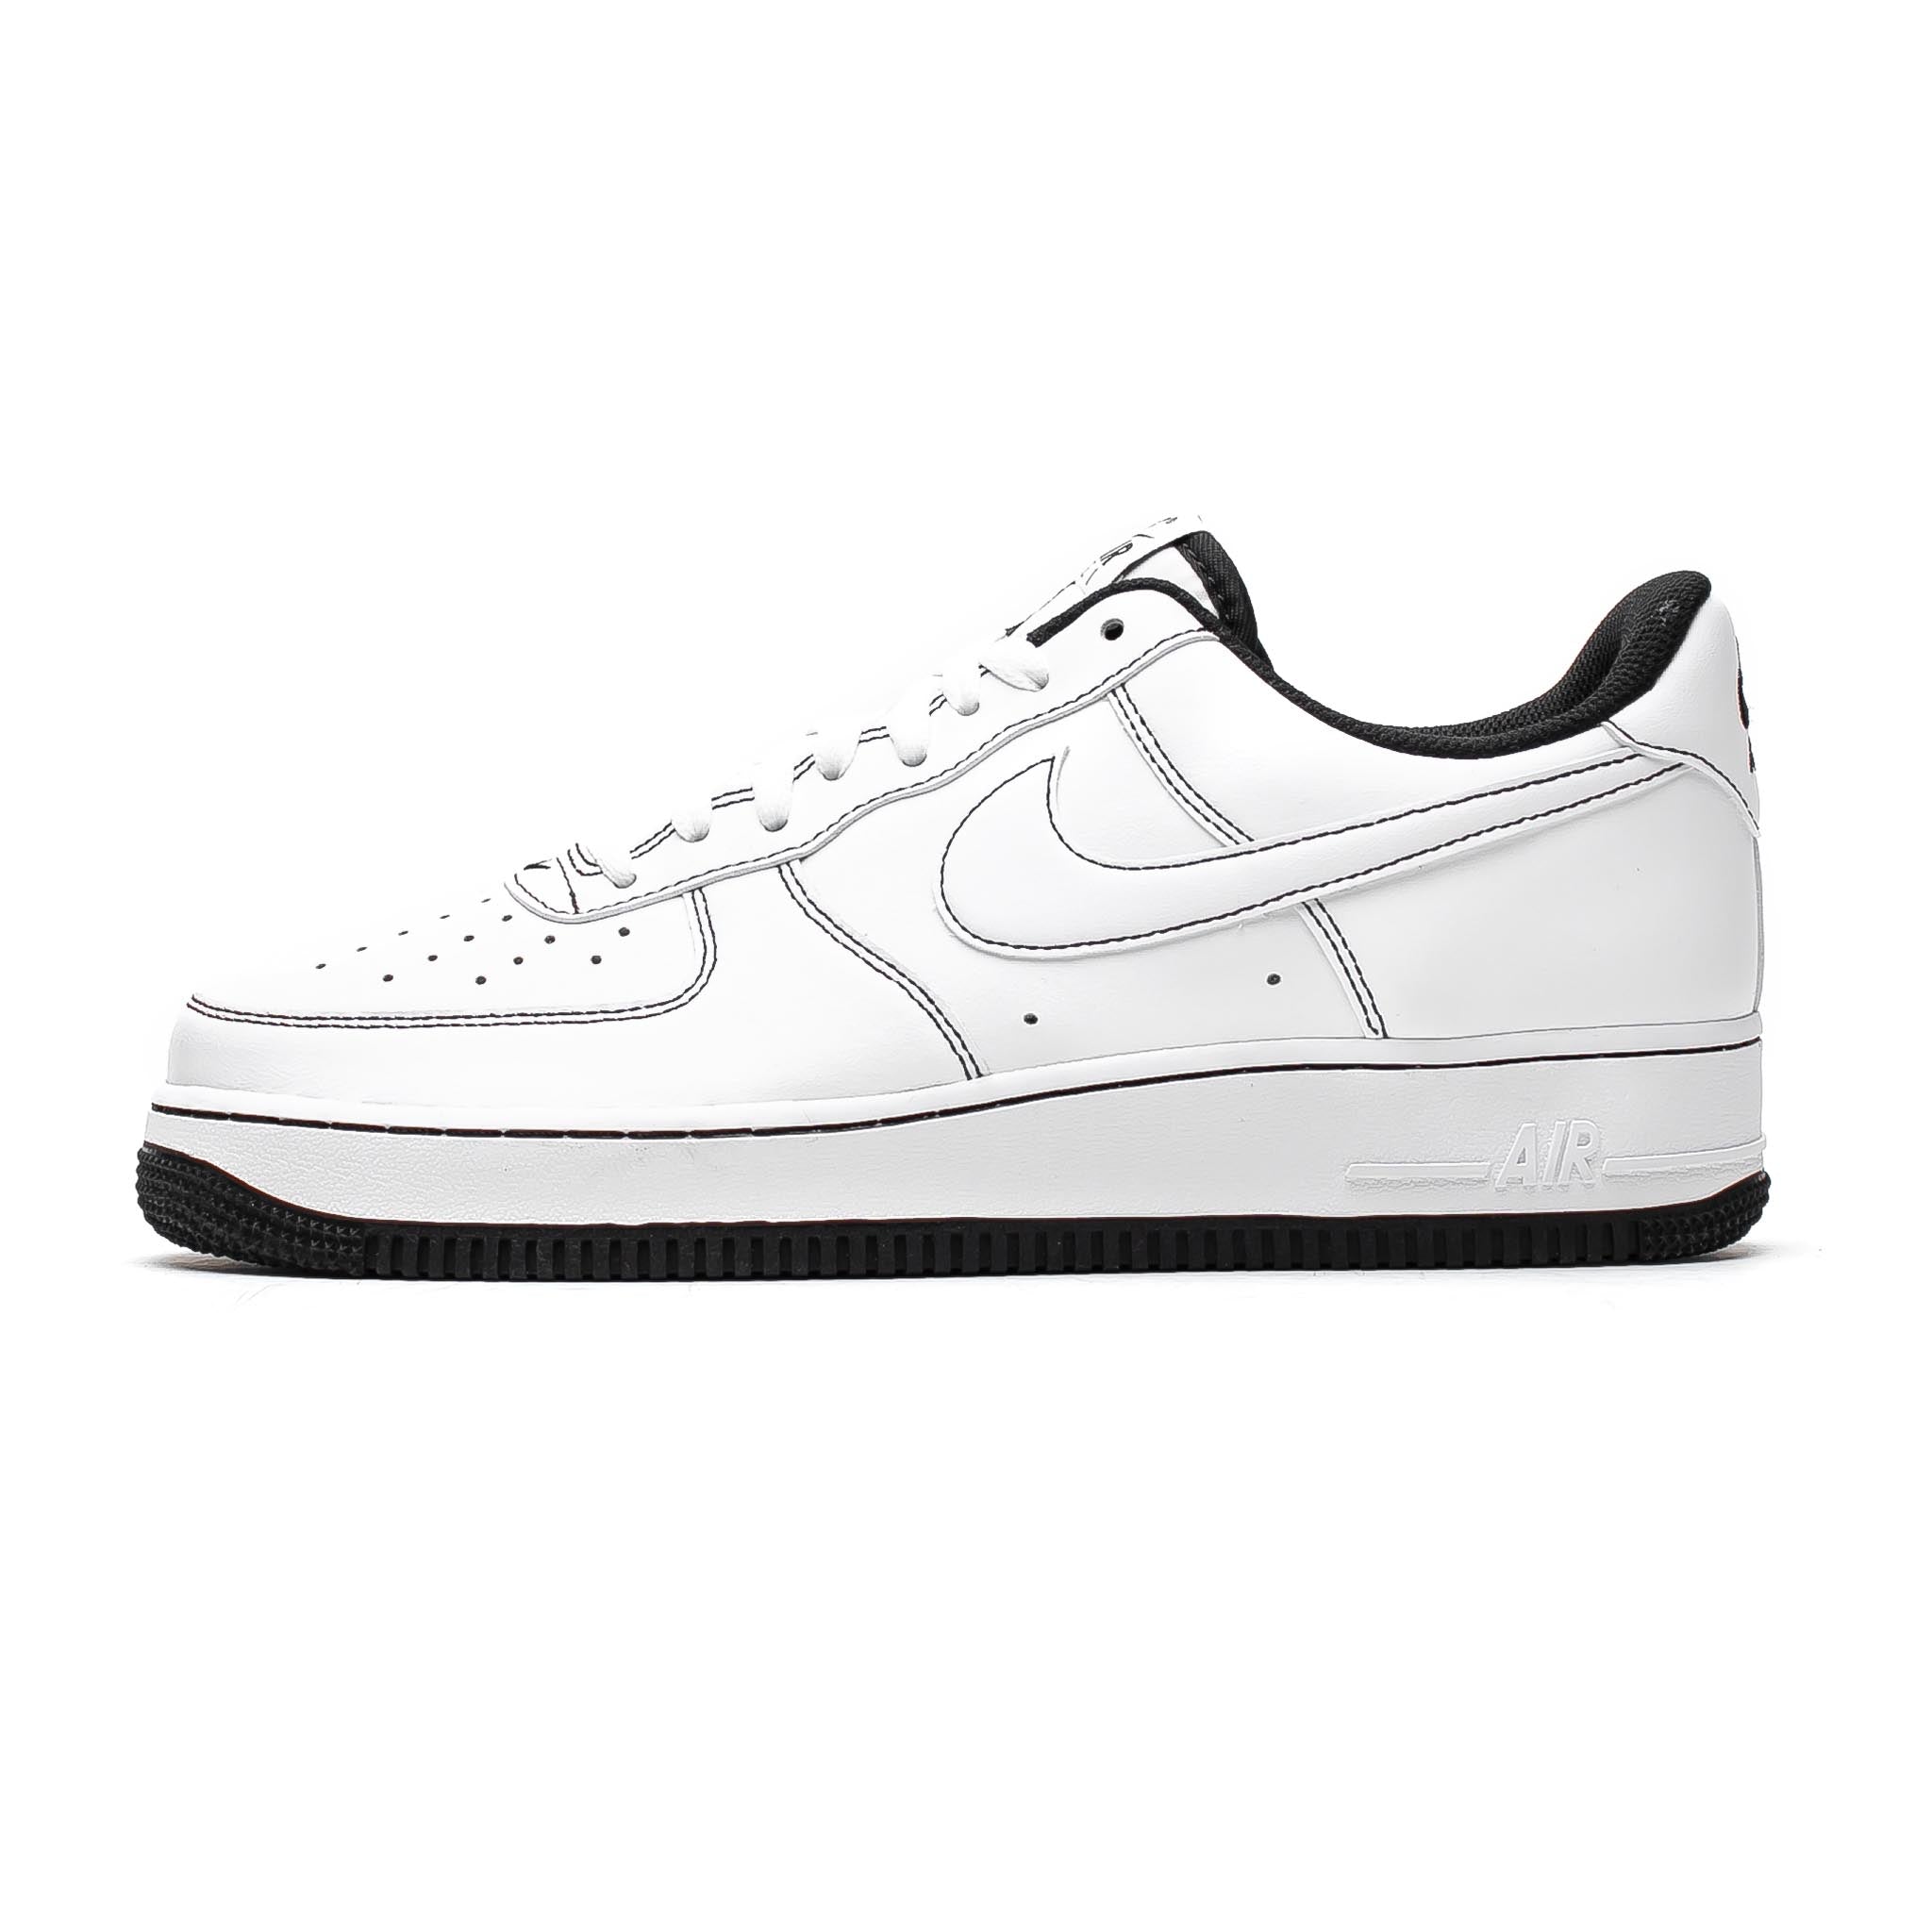 white air forces with black stitching